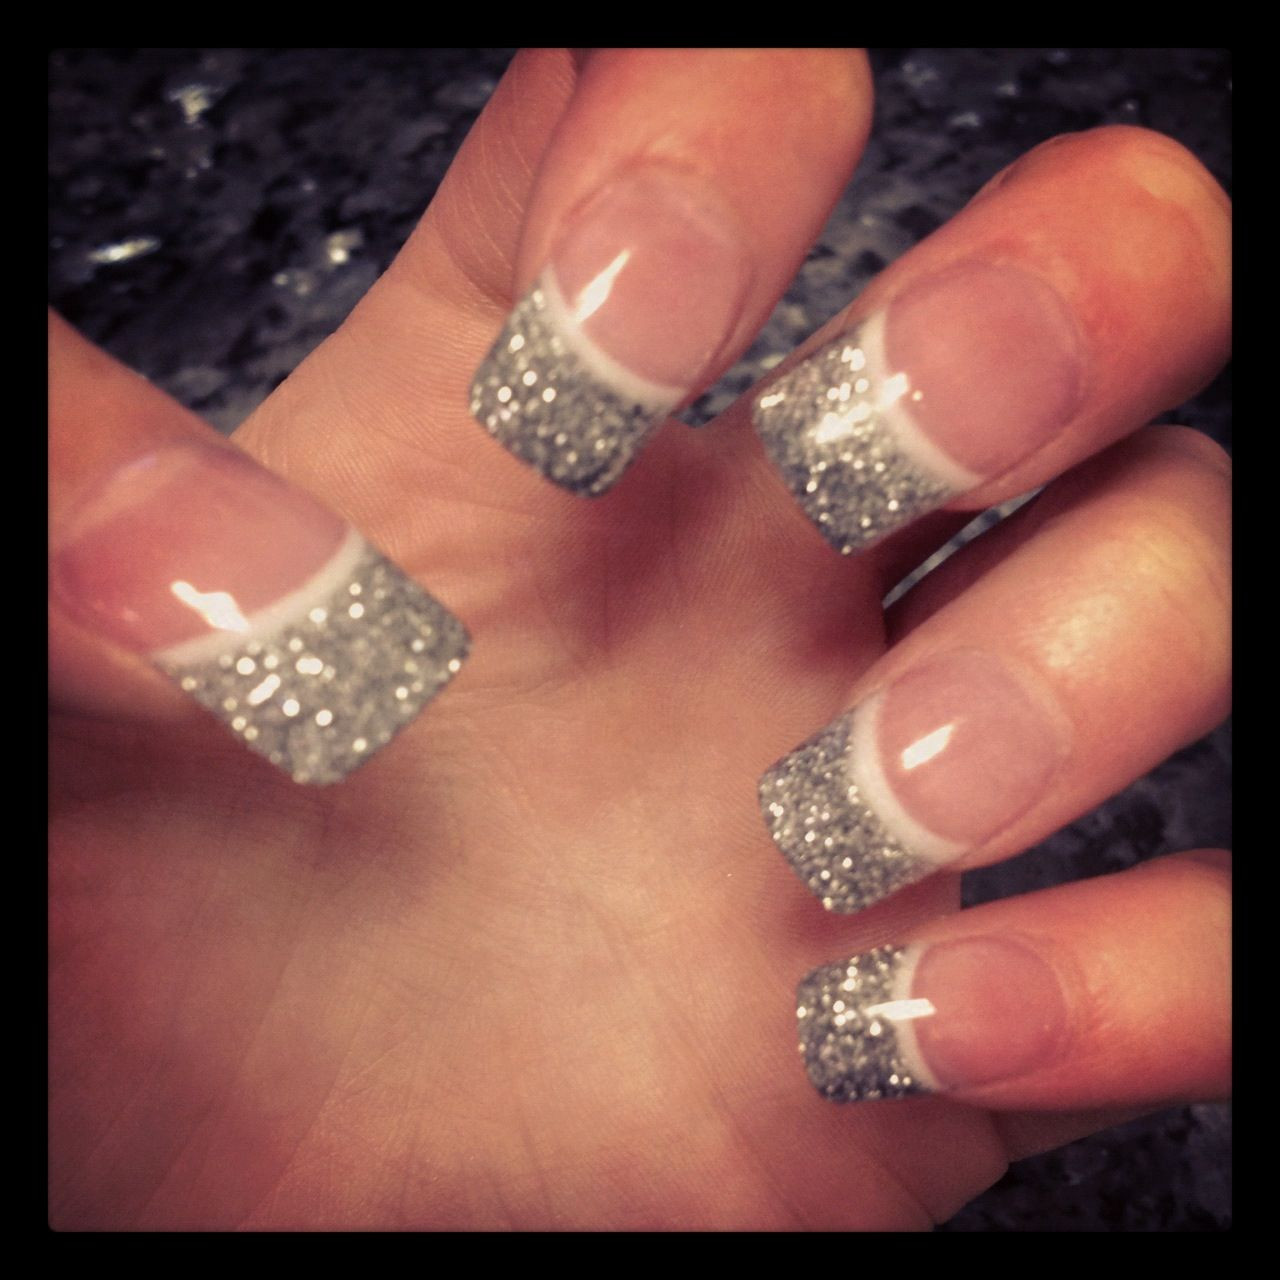 Silver Glitter Acrylic Nails
 Best 25 Silver tip nails ideas on Pinterest